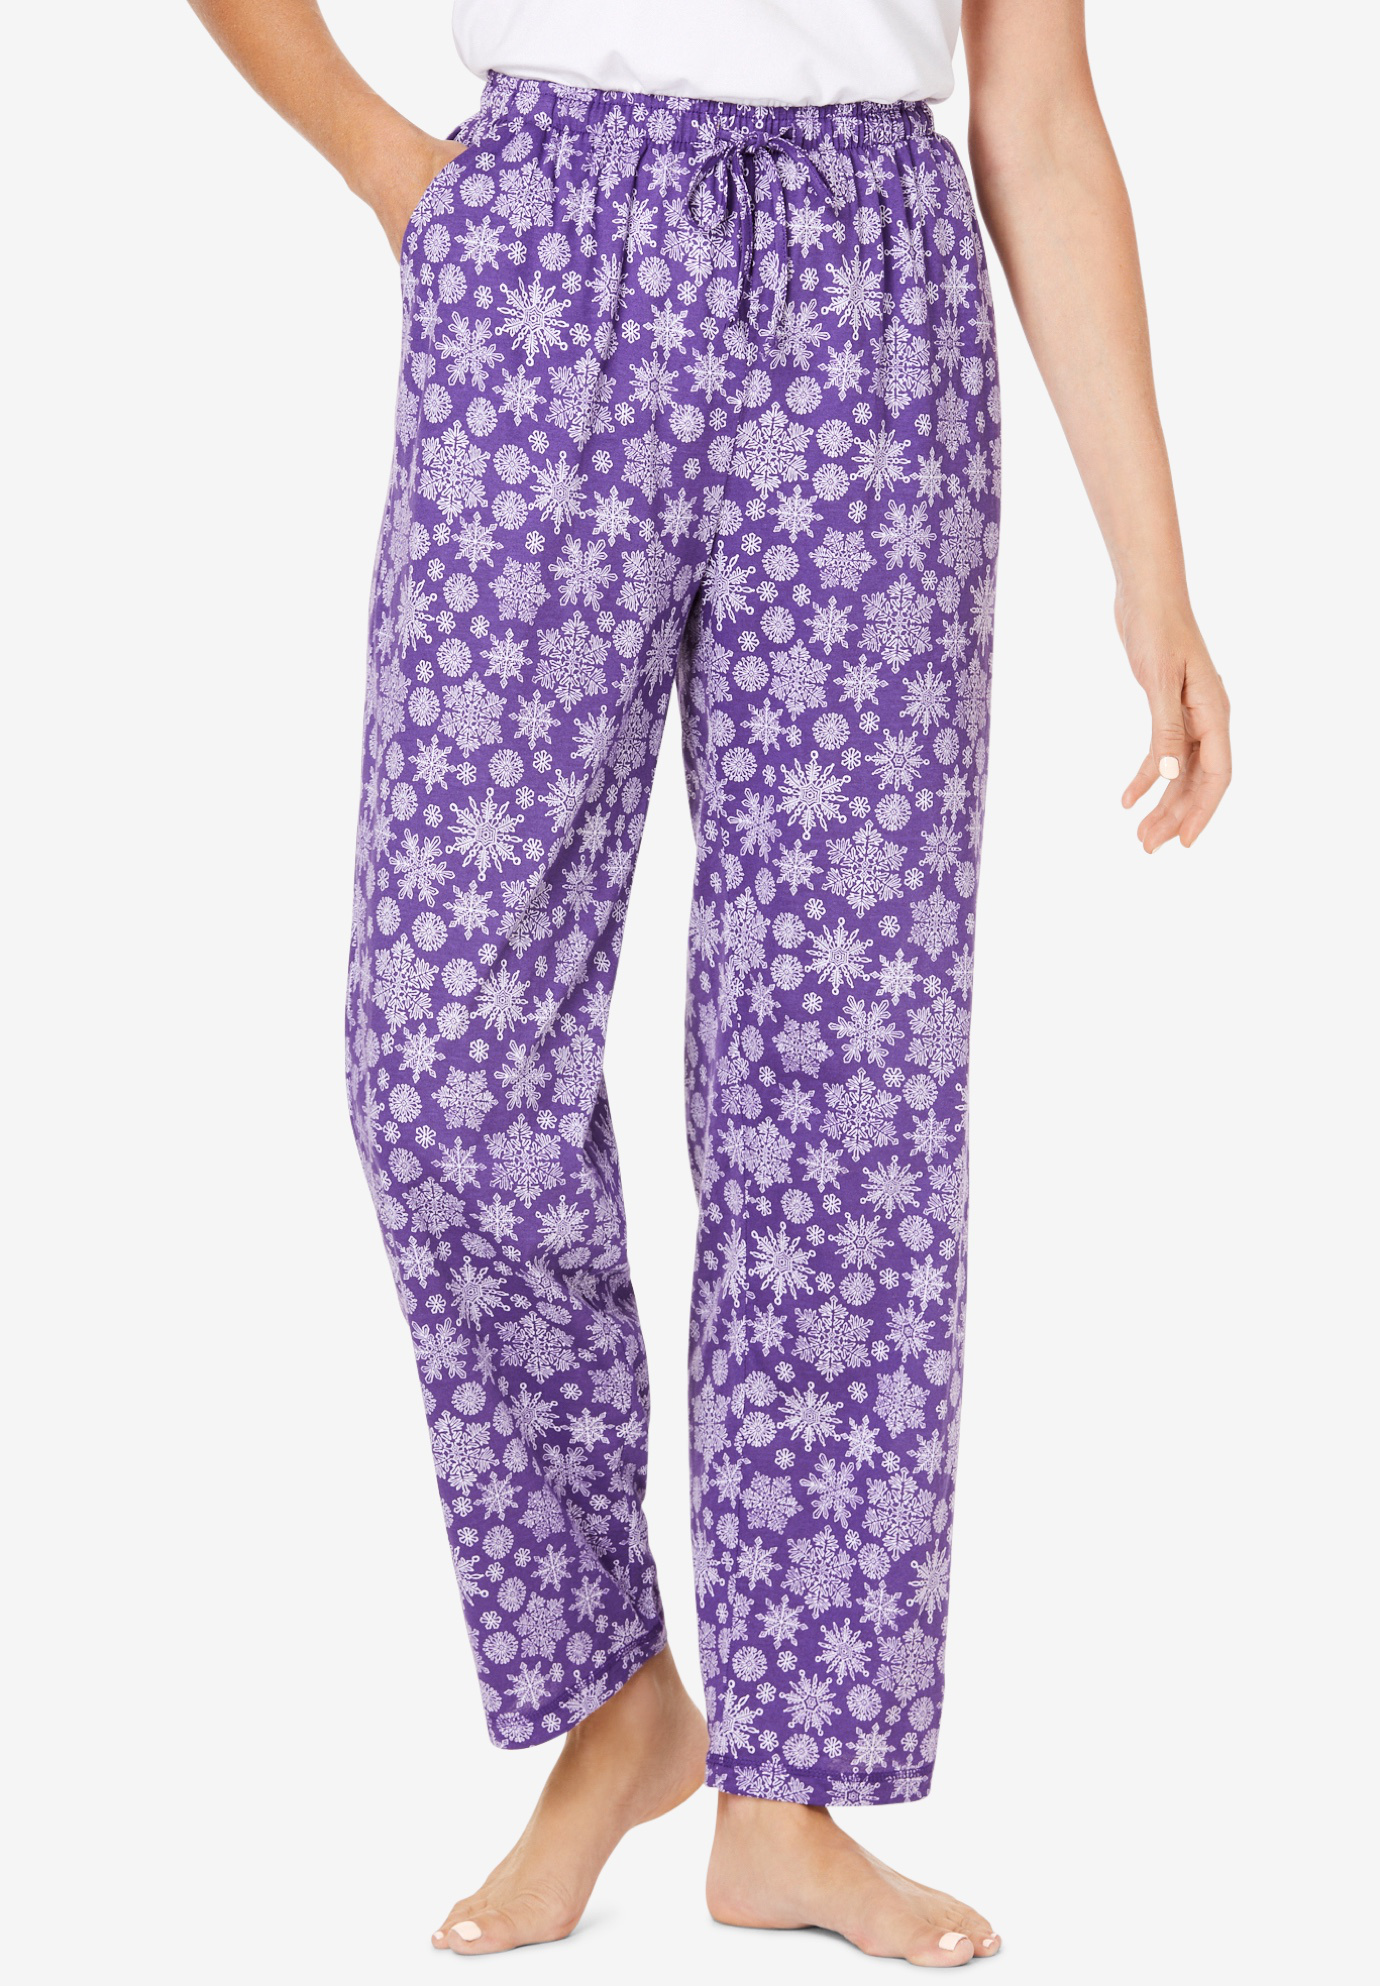 Knit Sleep Pant | Woman Within